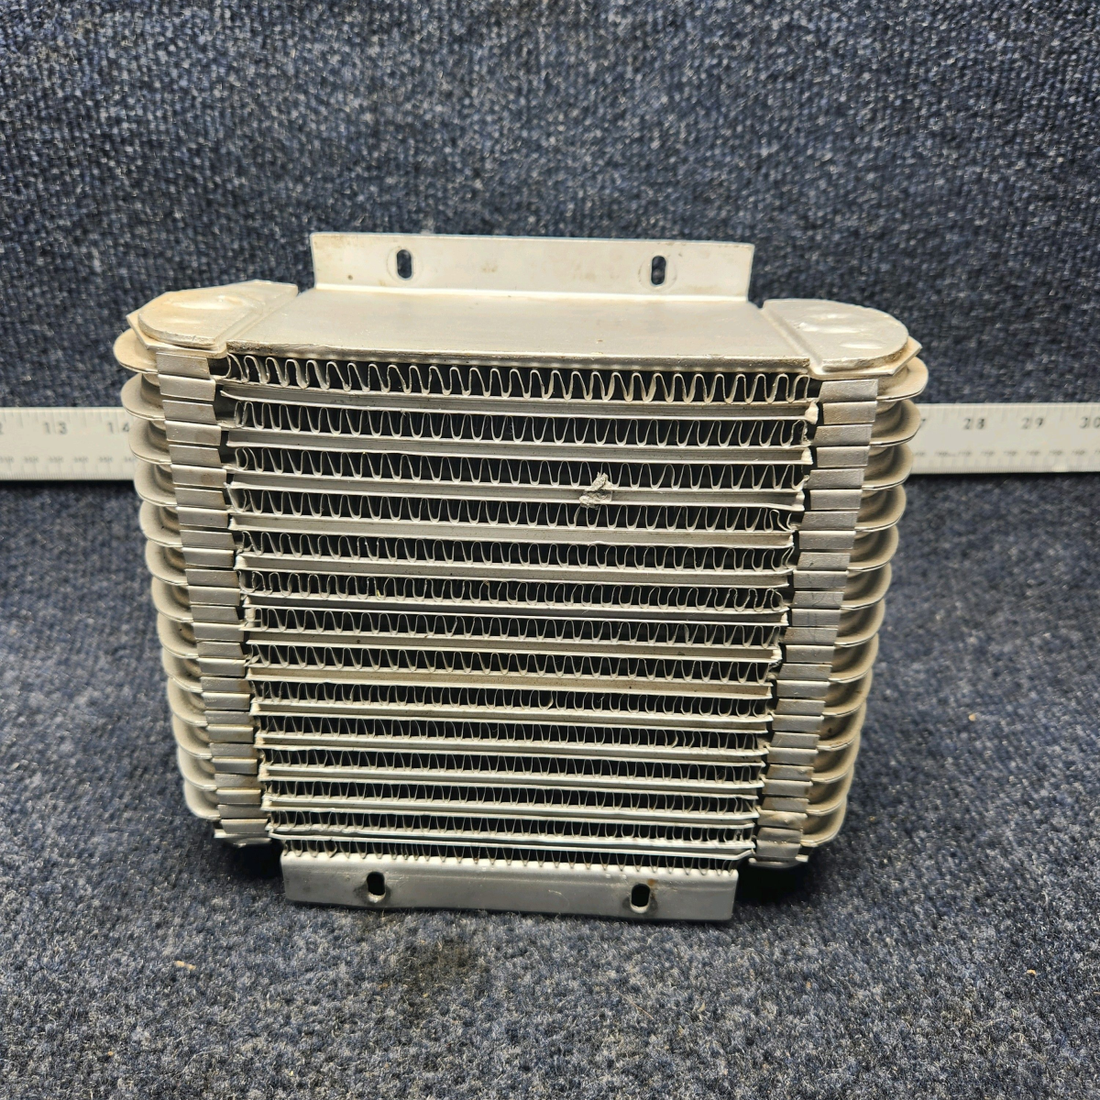 Used aircraft parts for sale, 8537820 Lycoming Textron OIL COOLER ASSEMBLY "SEE PHOTOS"